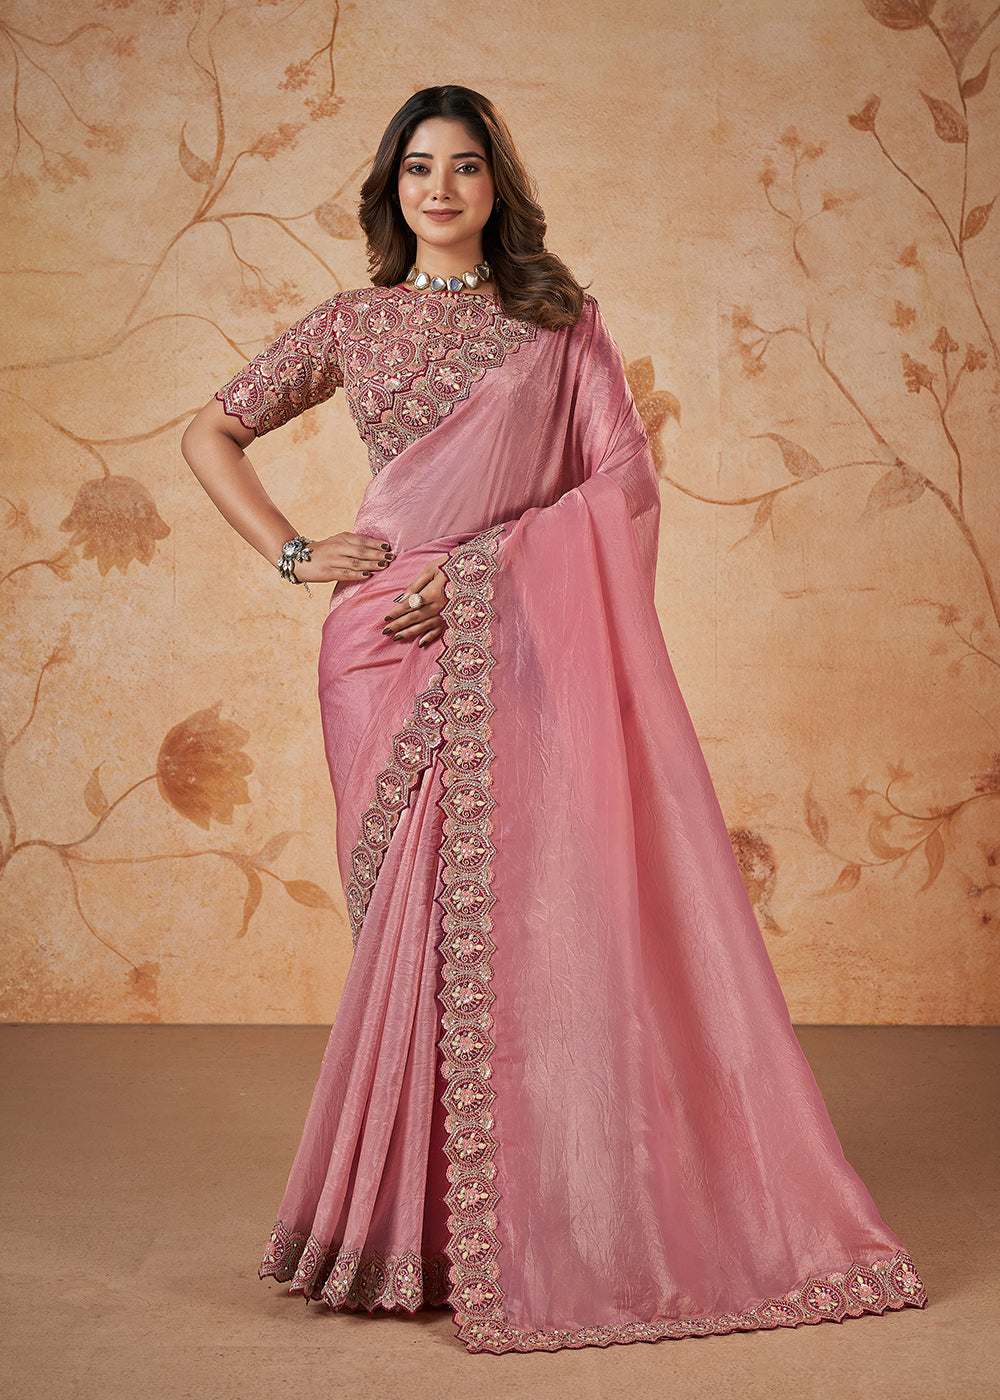 Indian Wedding Dresses - Pink Satin Embroidered Party Wear Saree